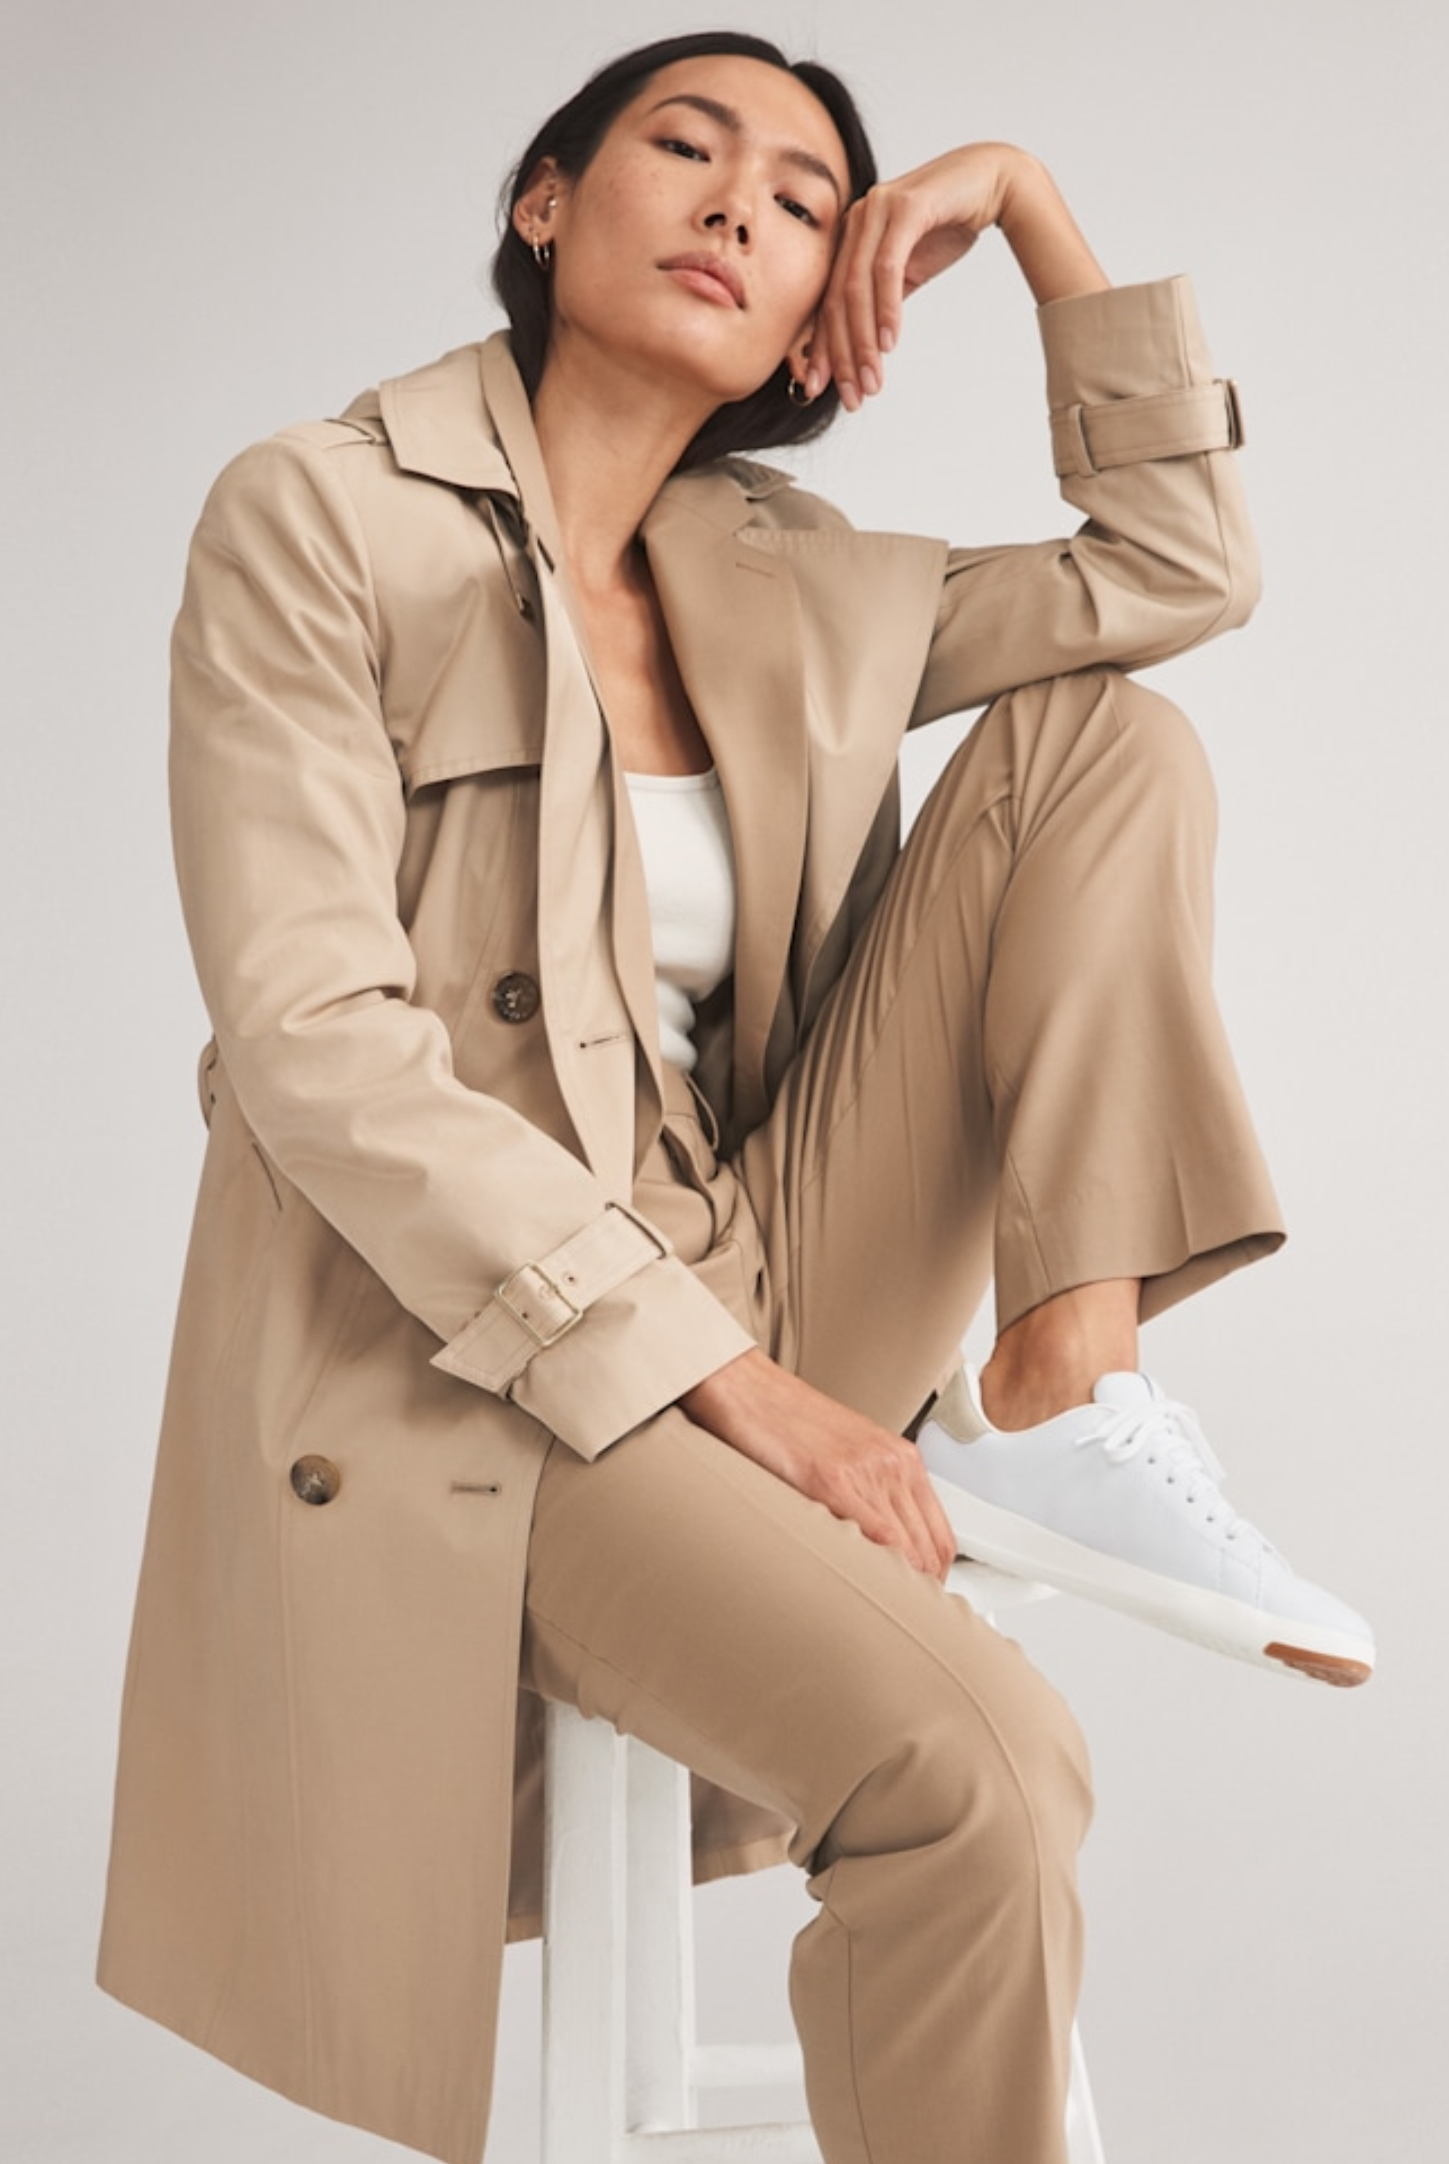 female model sitting on a stool while wearing a tan trench coat with matching pants and white sneakers